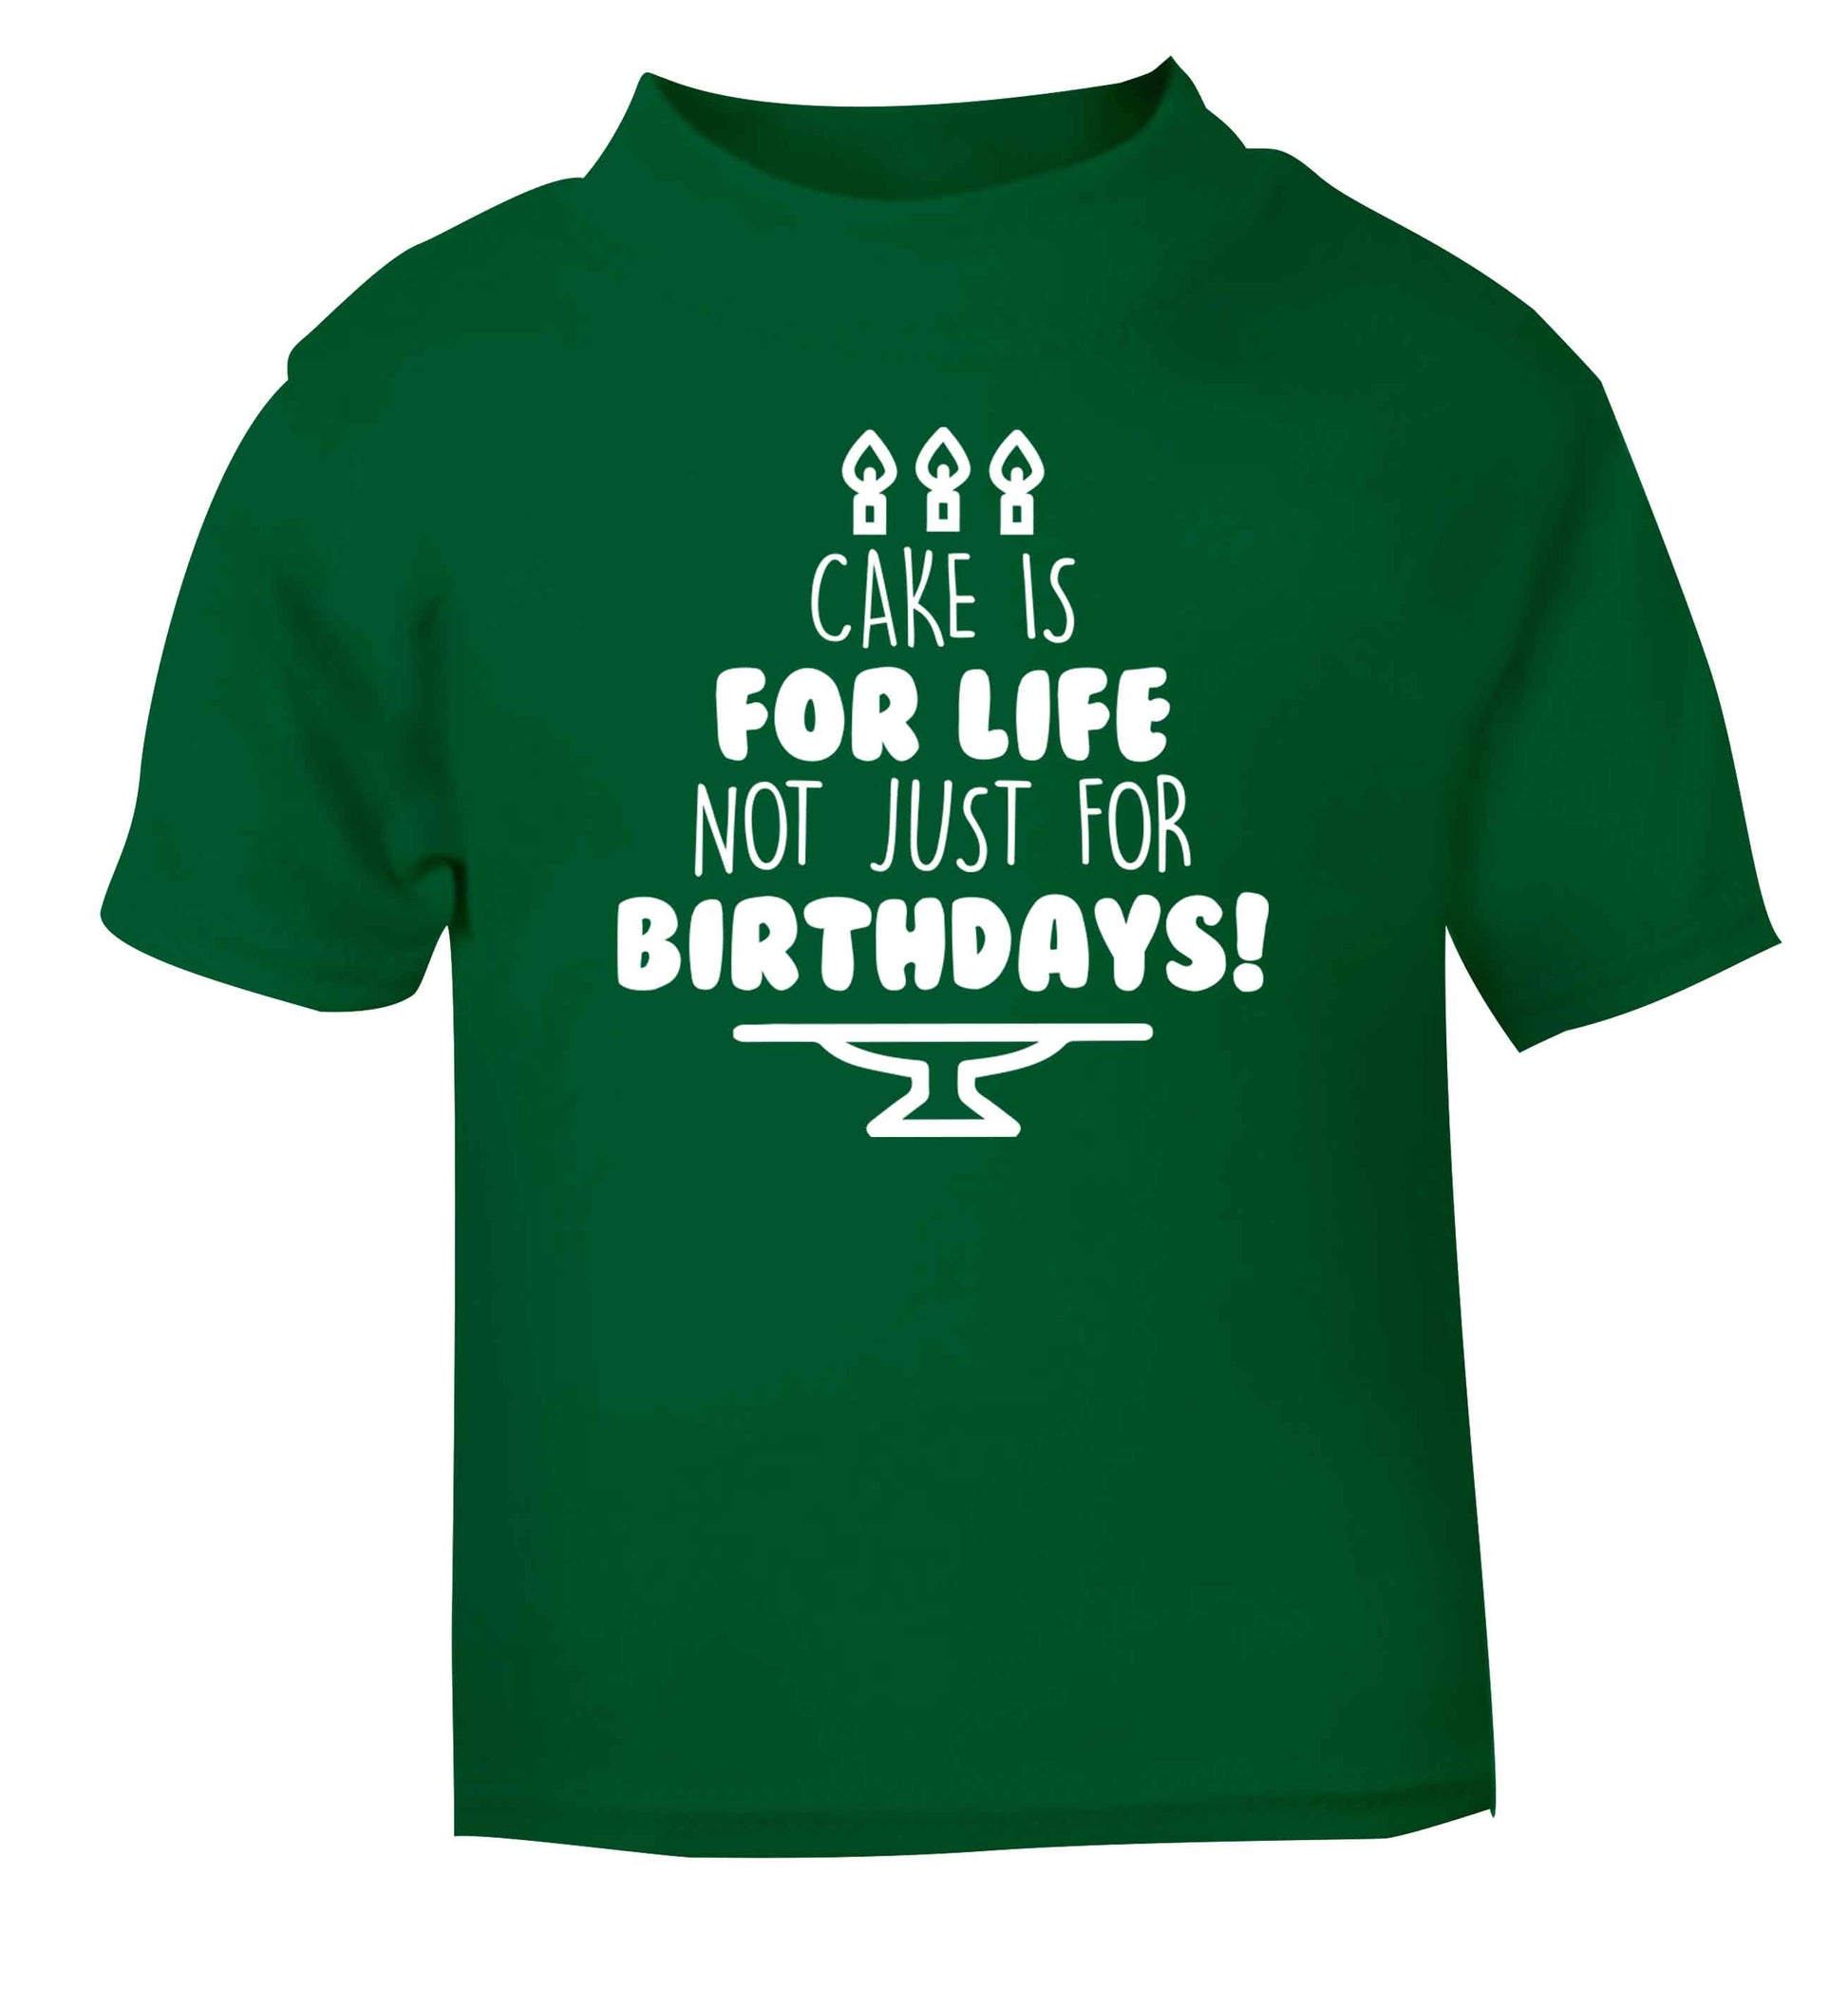 Cake is for life not just for birthdays green Baby Toddler Tshirt 2 Years